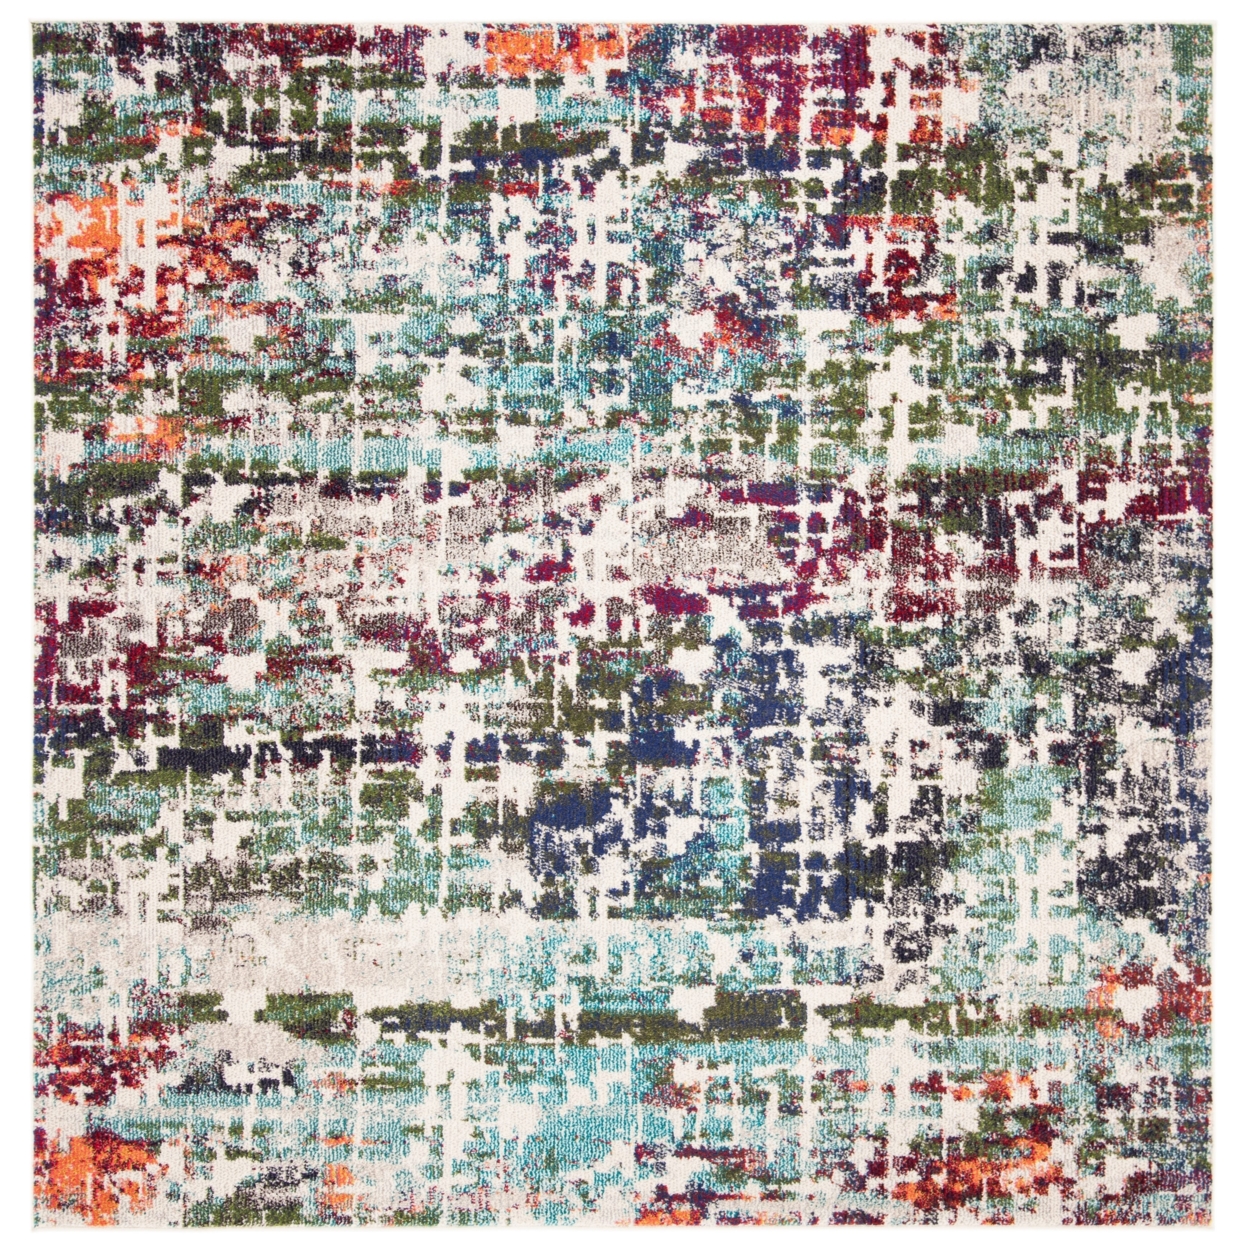 SAFAVIEH Madison Collection MAD469A Blue / Green Rug - 6' 7 Square